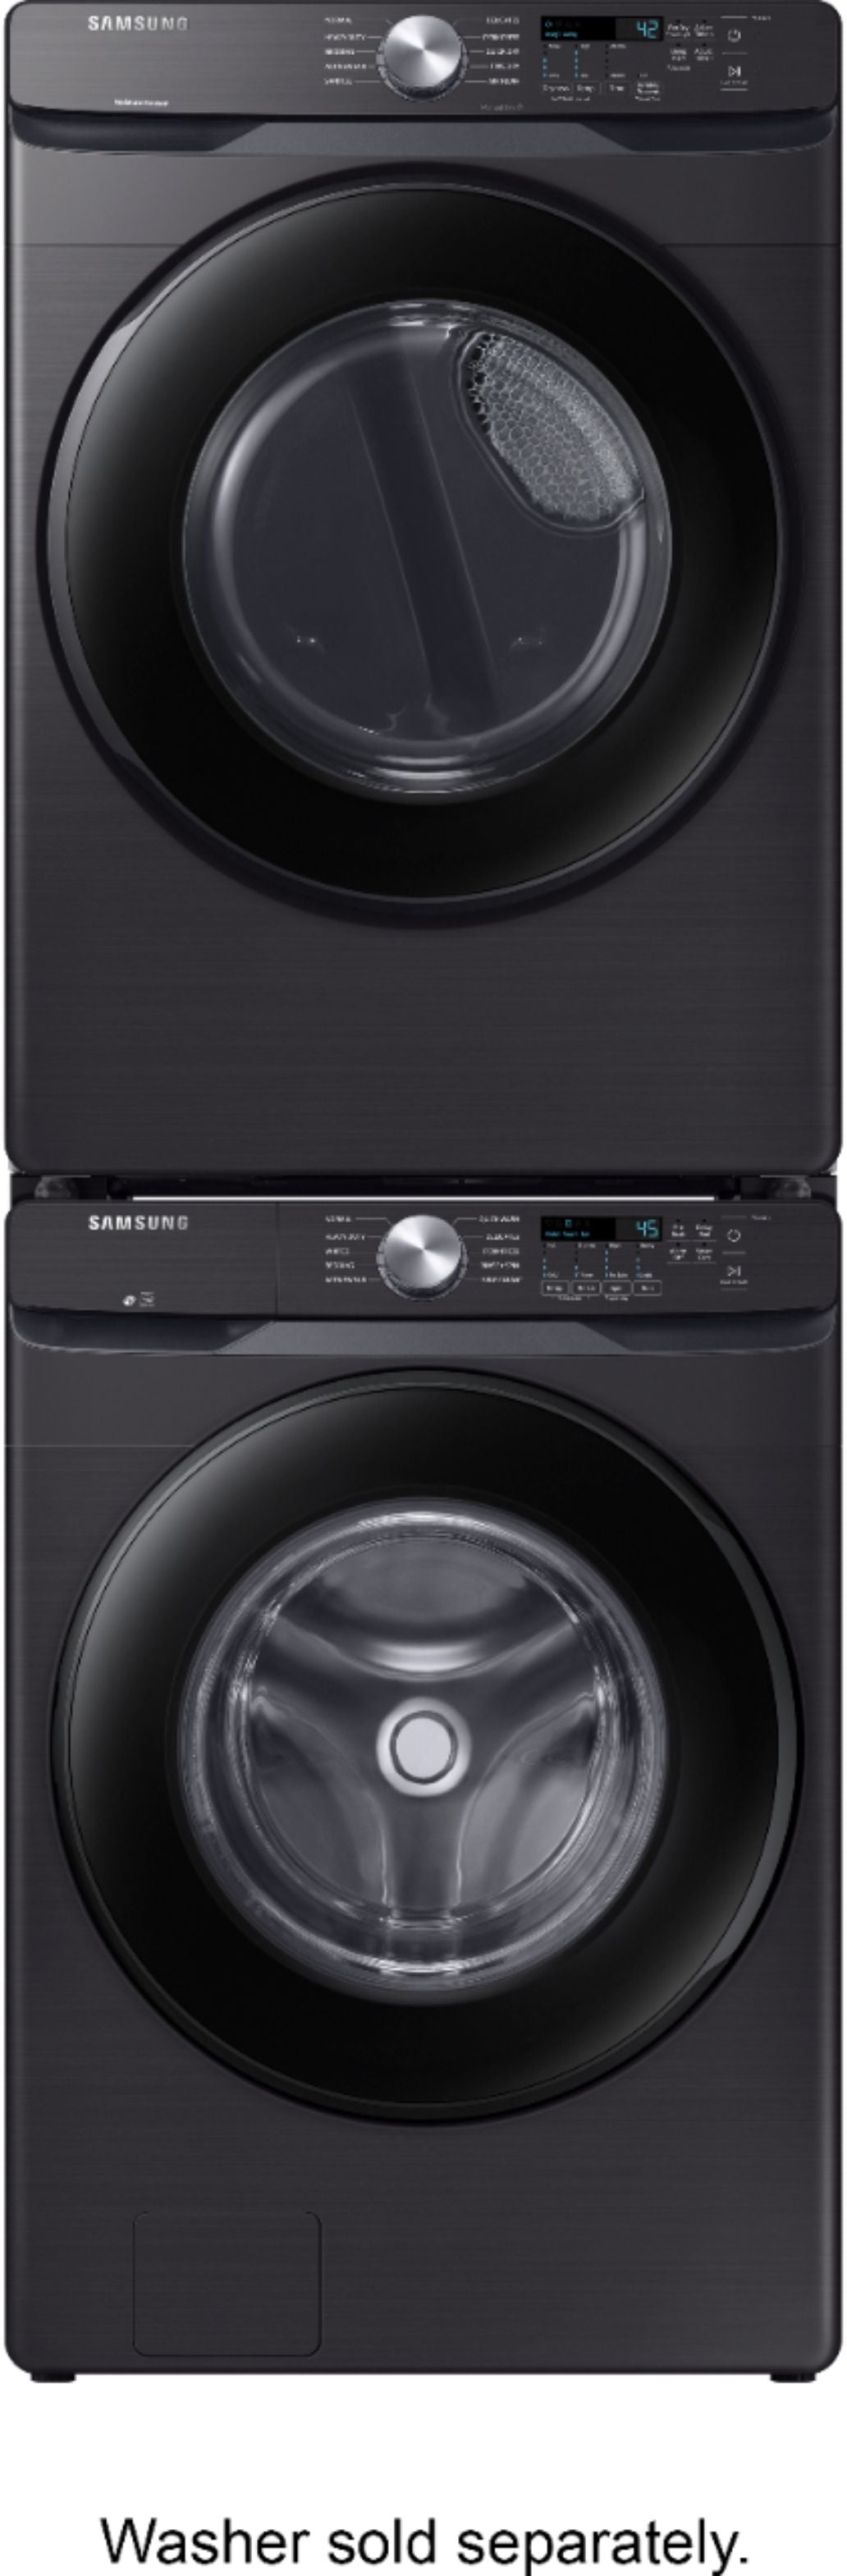 Samsung - 7.5 Cu. Ft. Stackable Gas Dryer with Sensor Dry - Black stainless steel_8